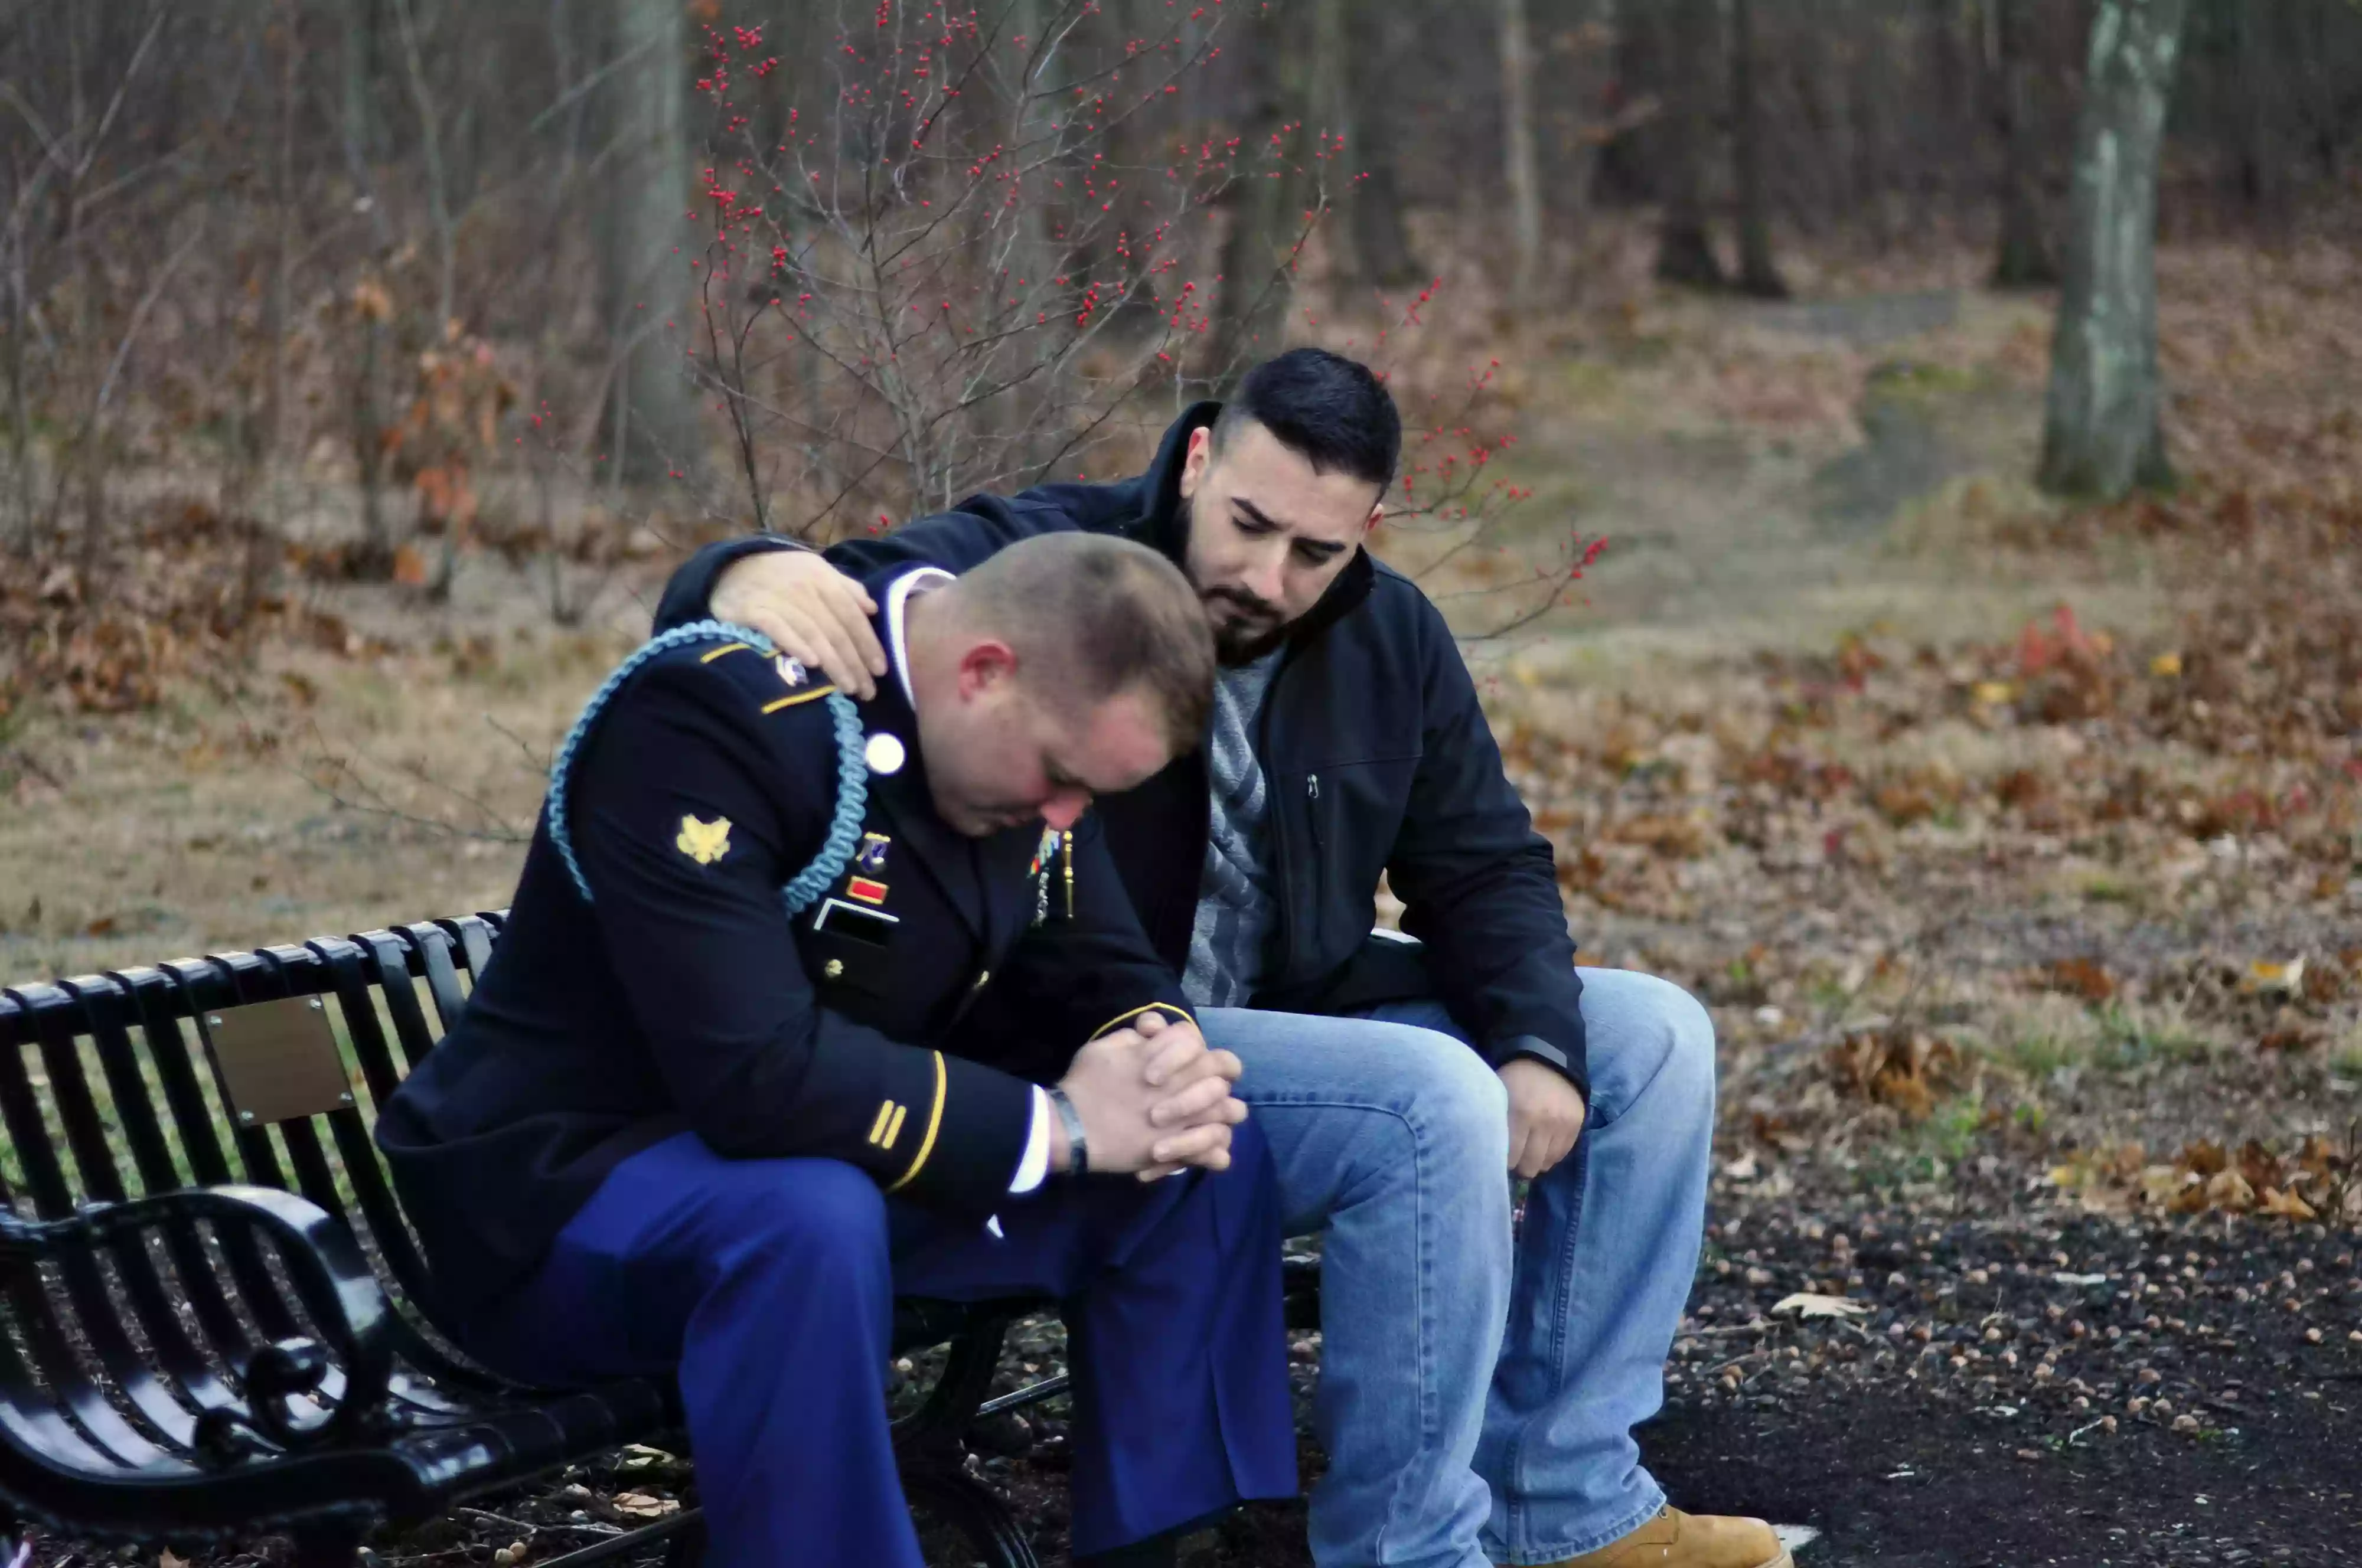 two men sitting on a park bench, one depressed and the other talking to and comforting him